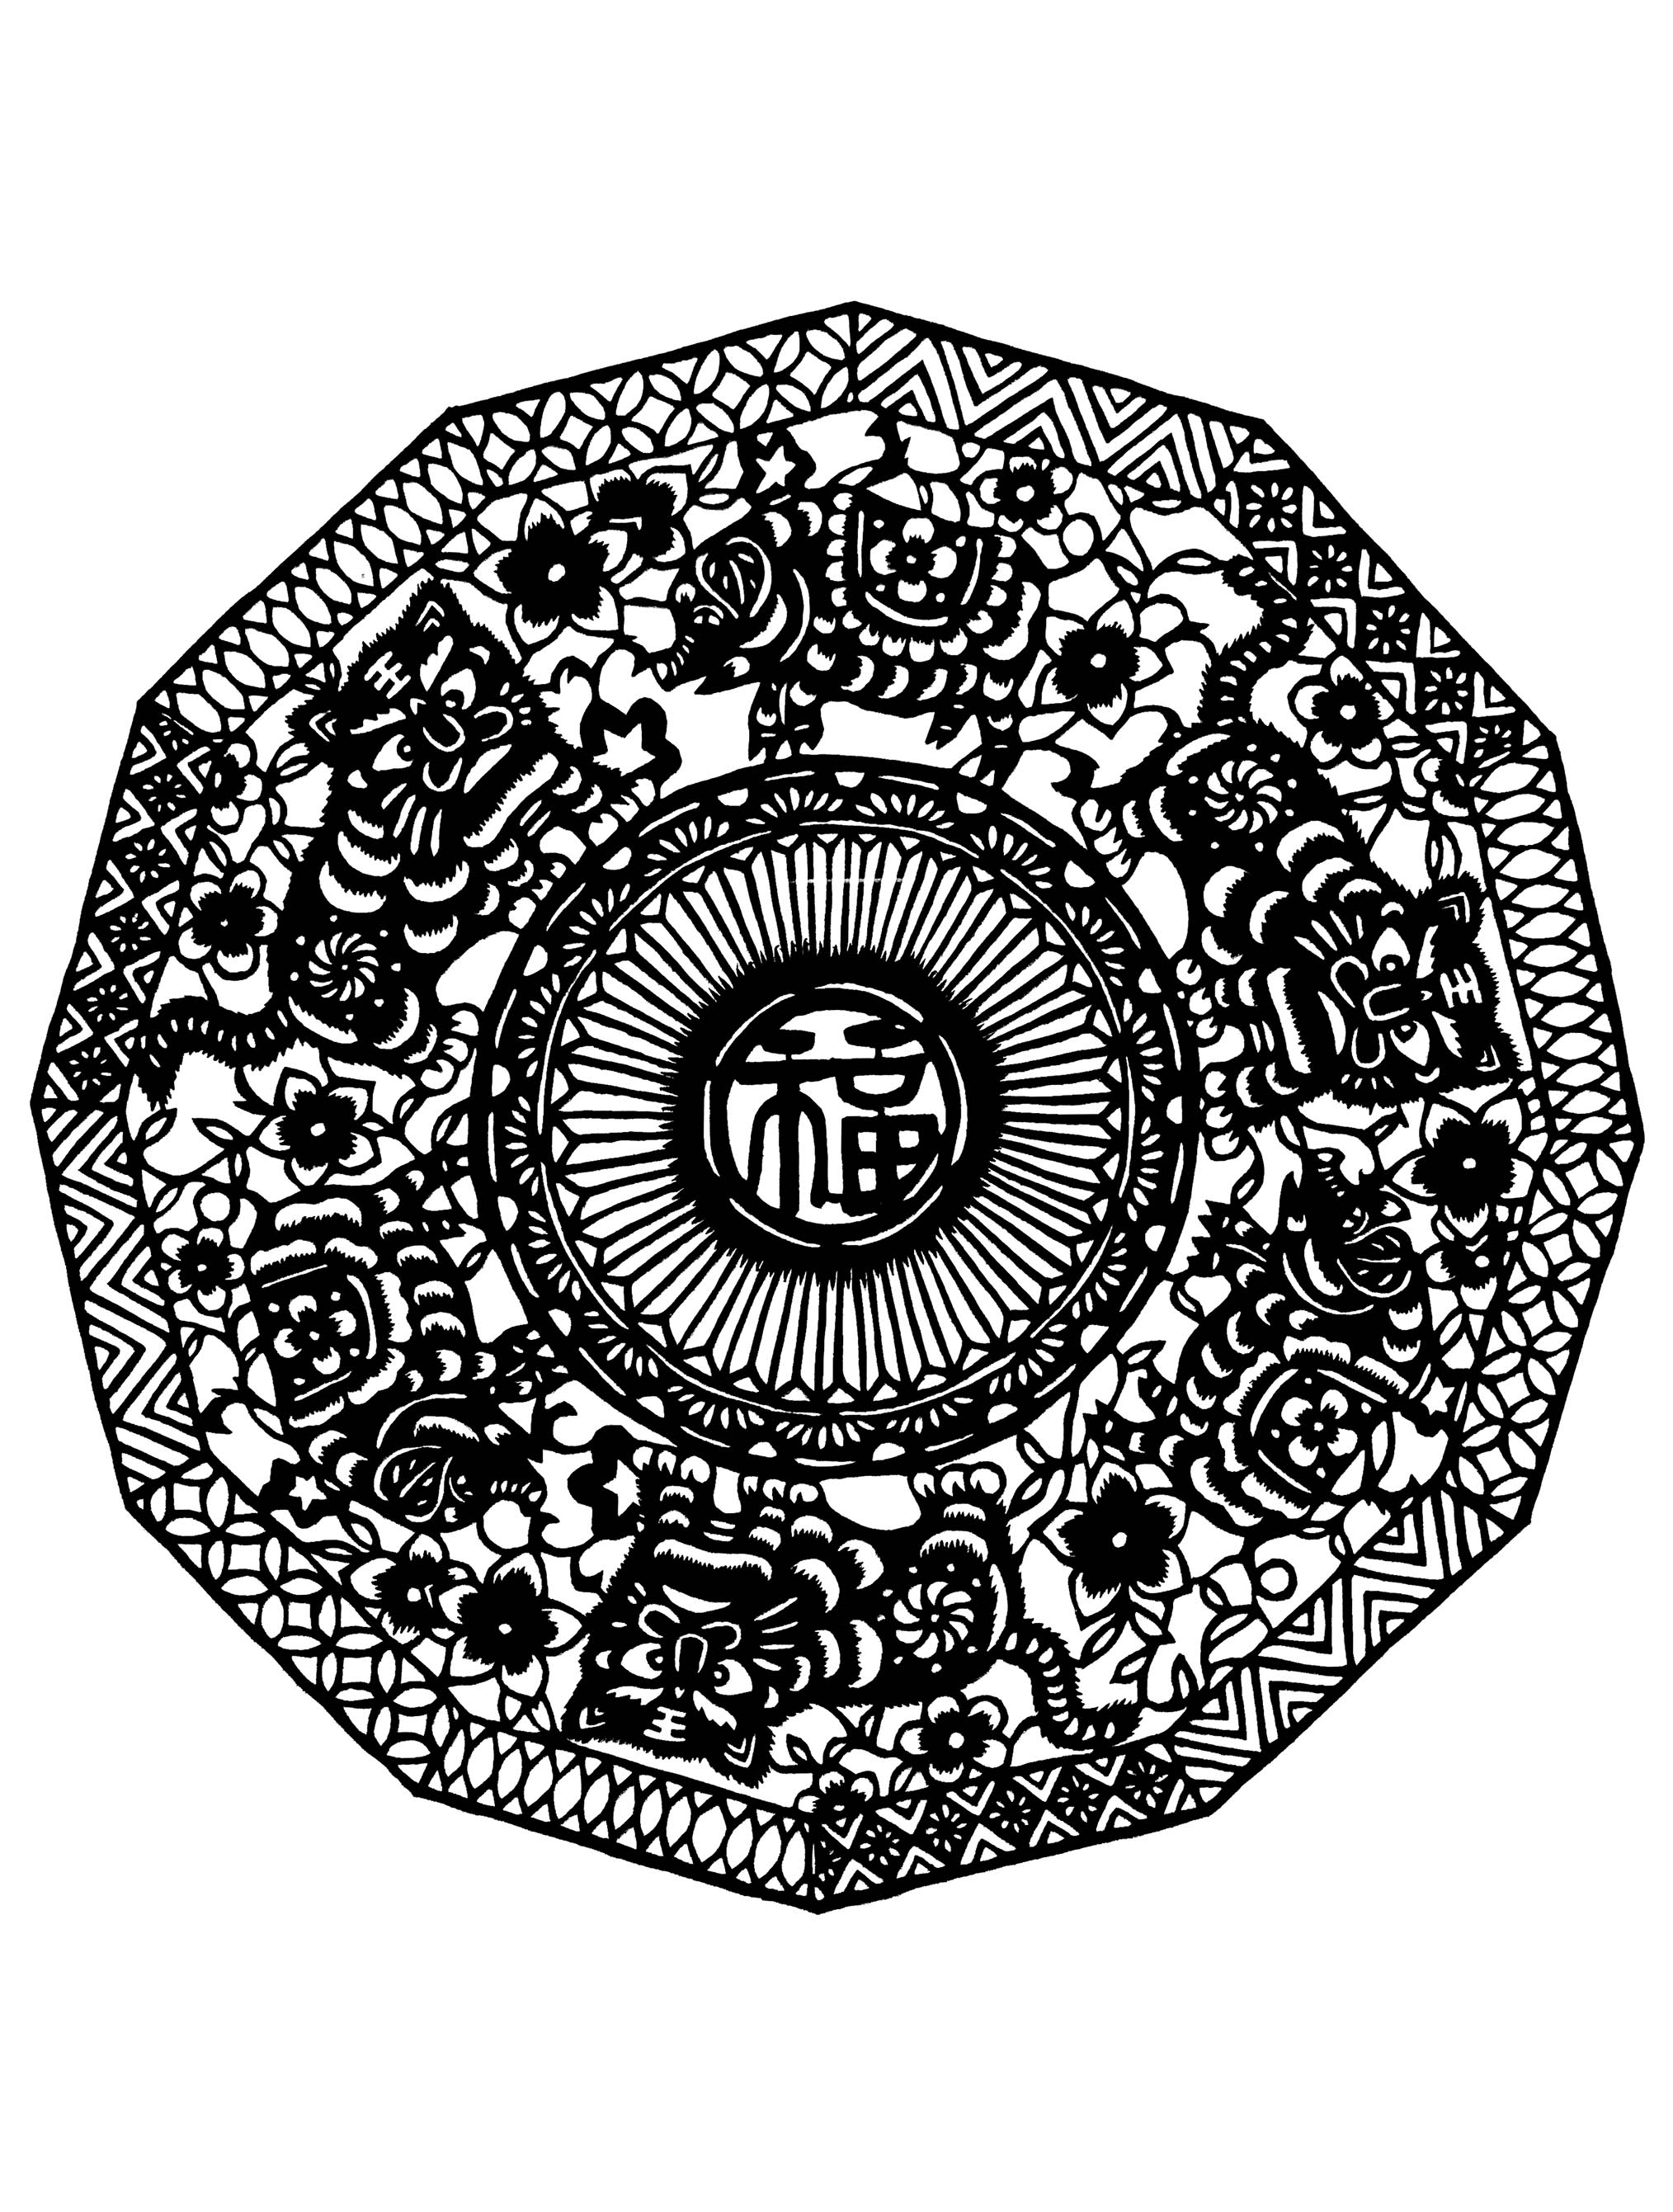 Mandala inspired by chinese patterns and drawings